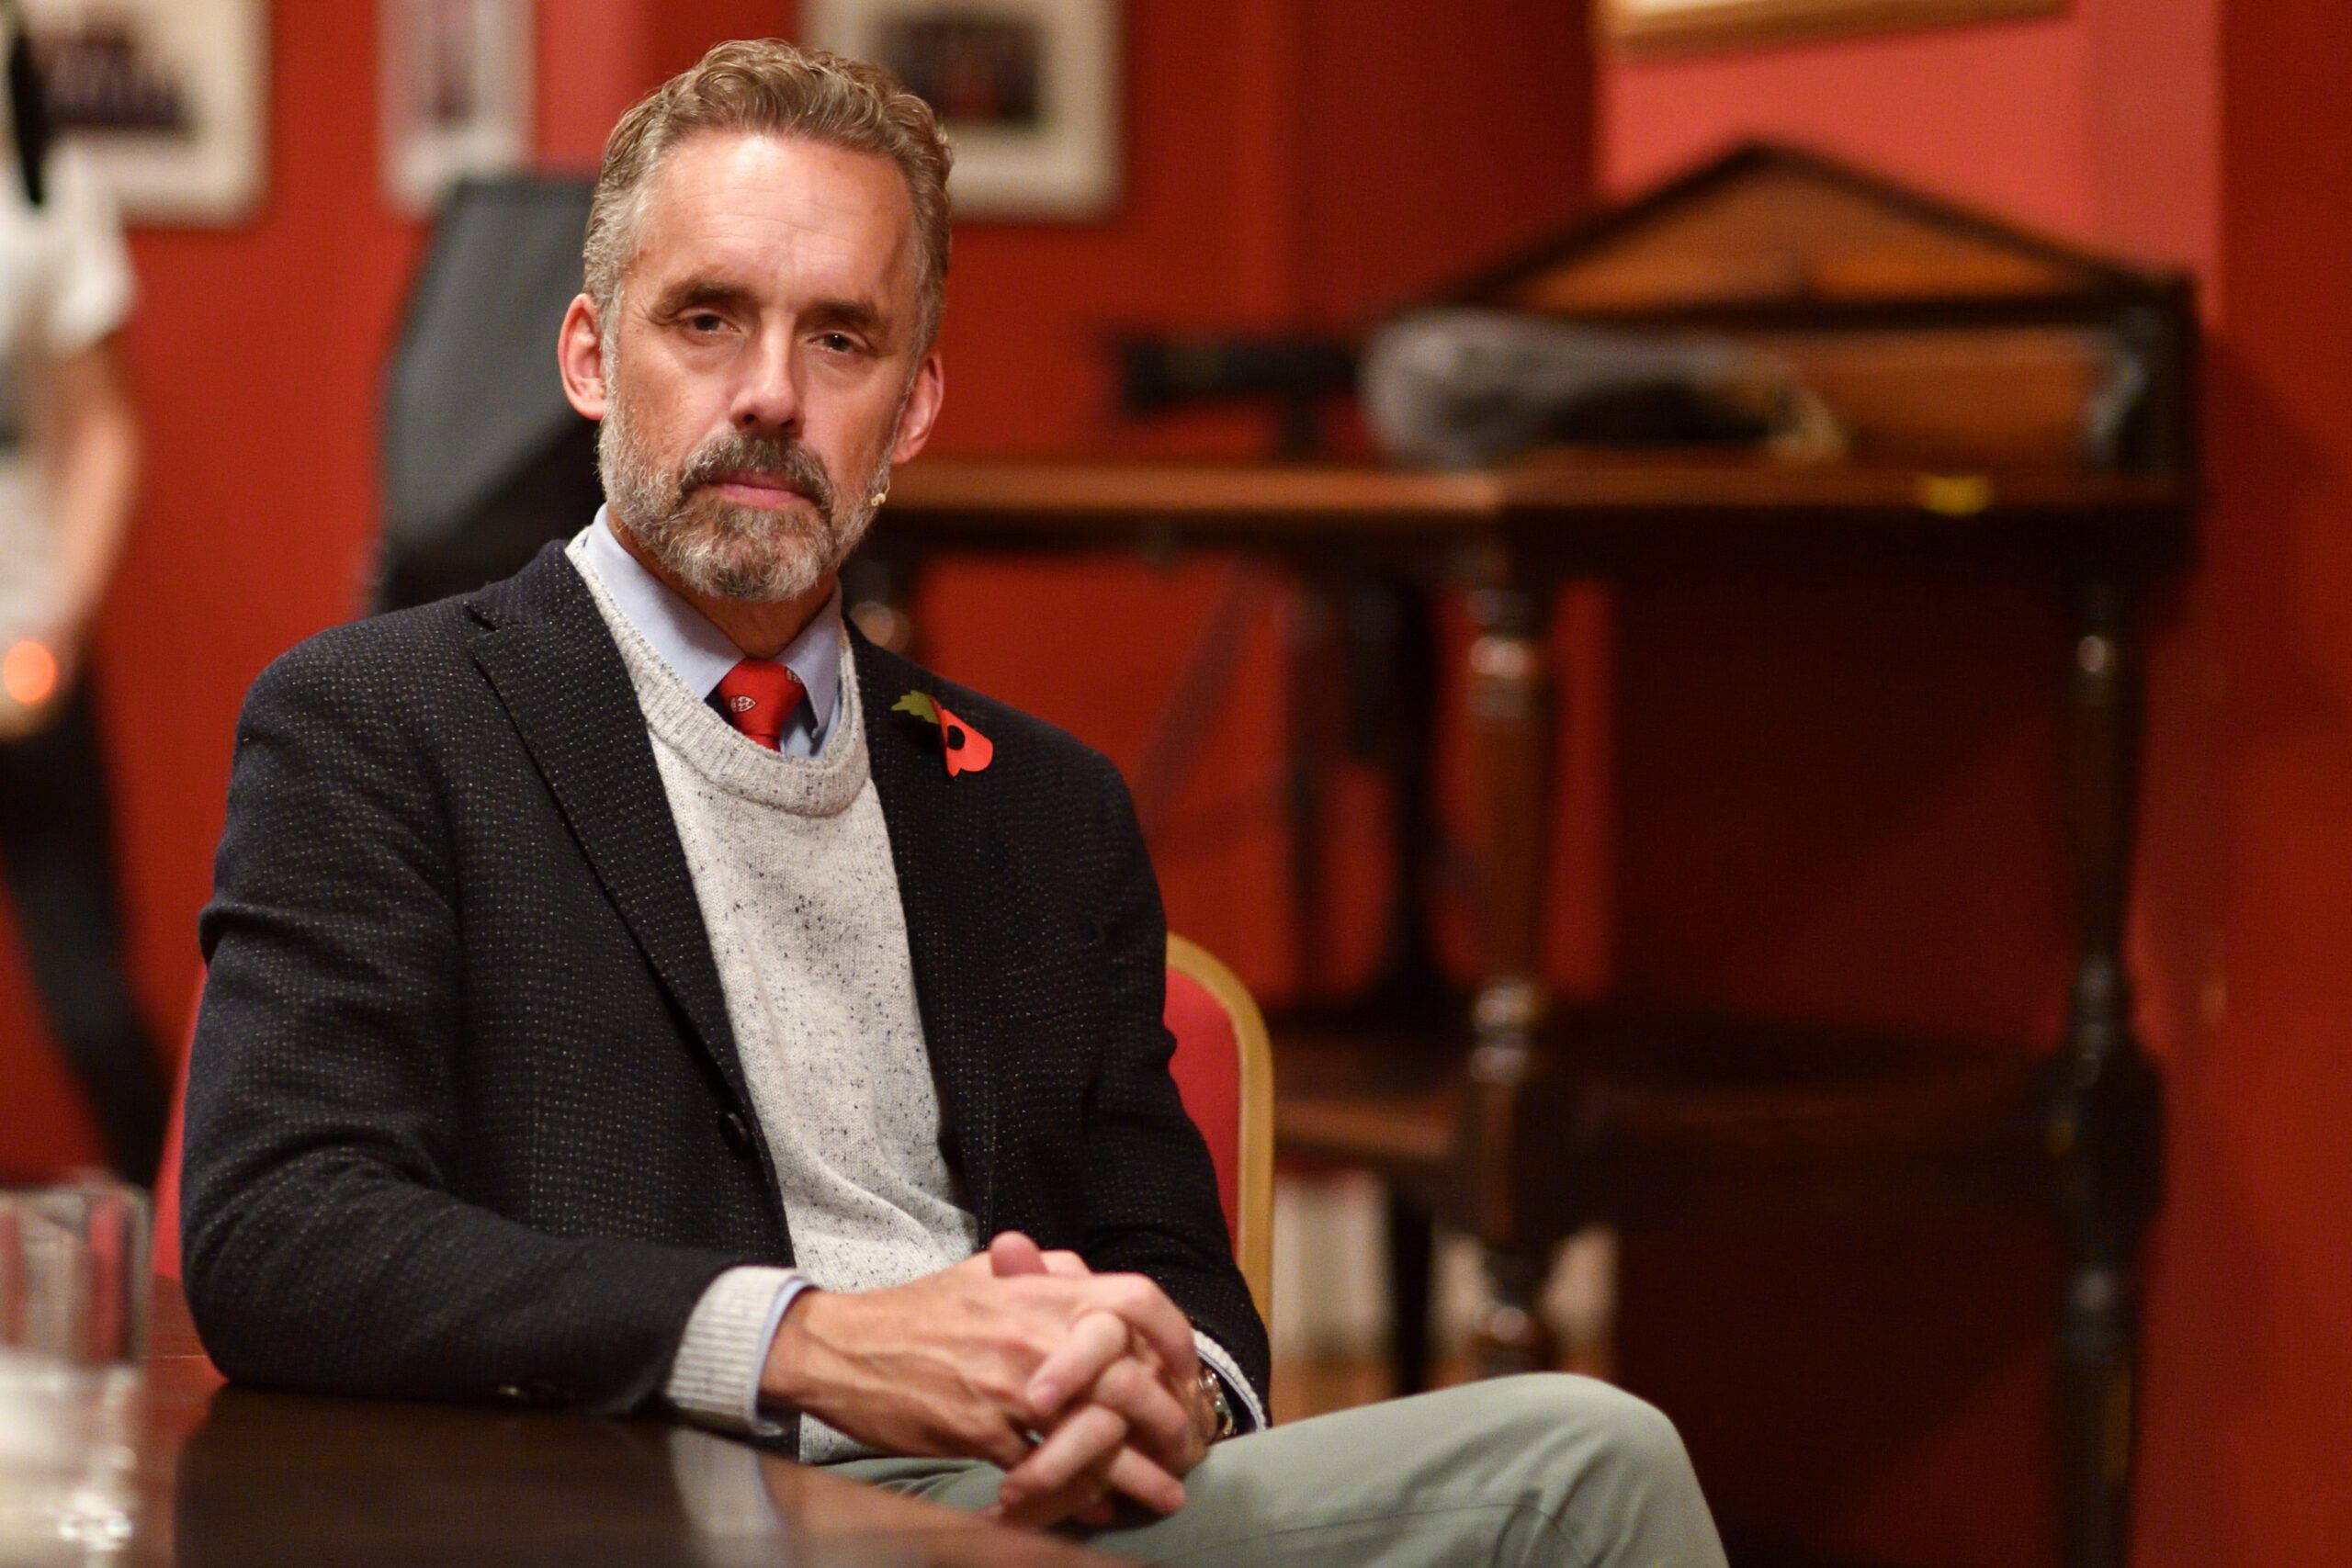 dr-jordan-b.-peterson:-social-media-is-part-of-‘pollution-of-the-domain-of-public-discourse’